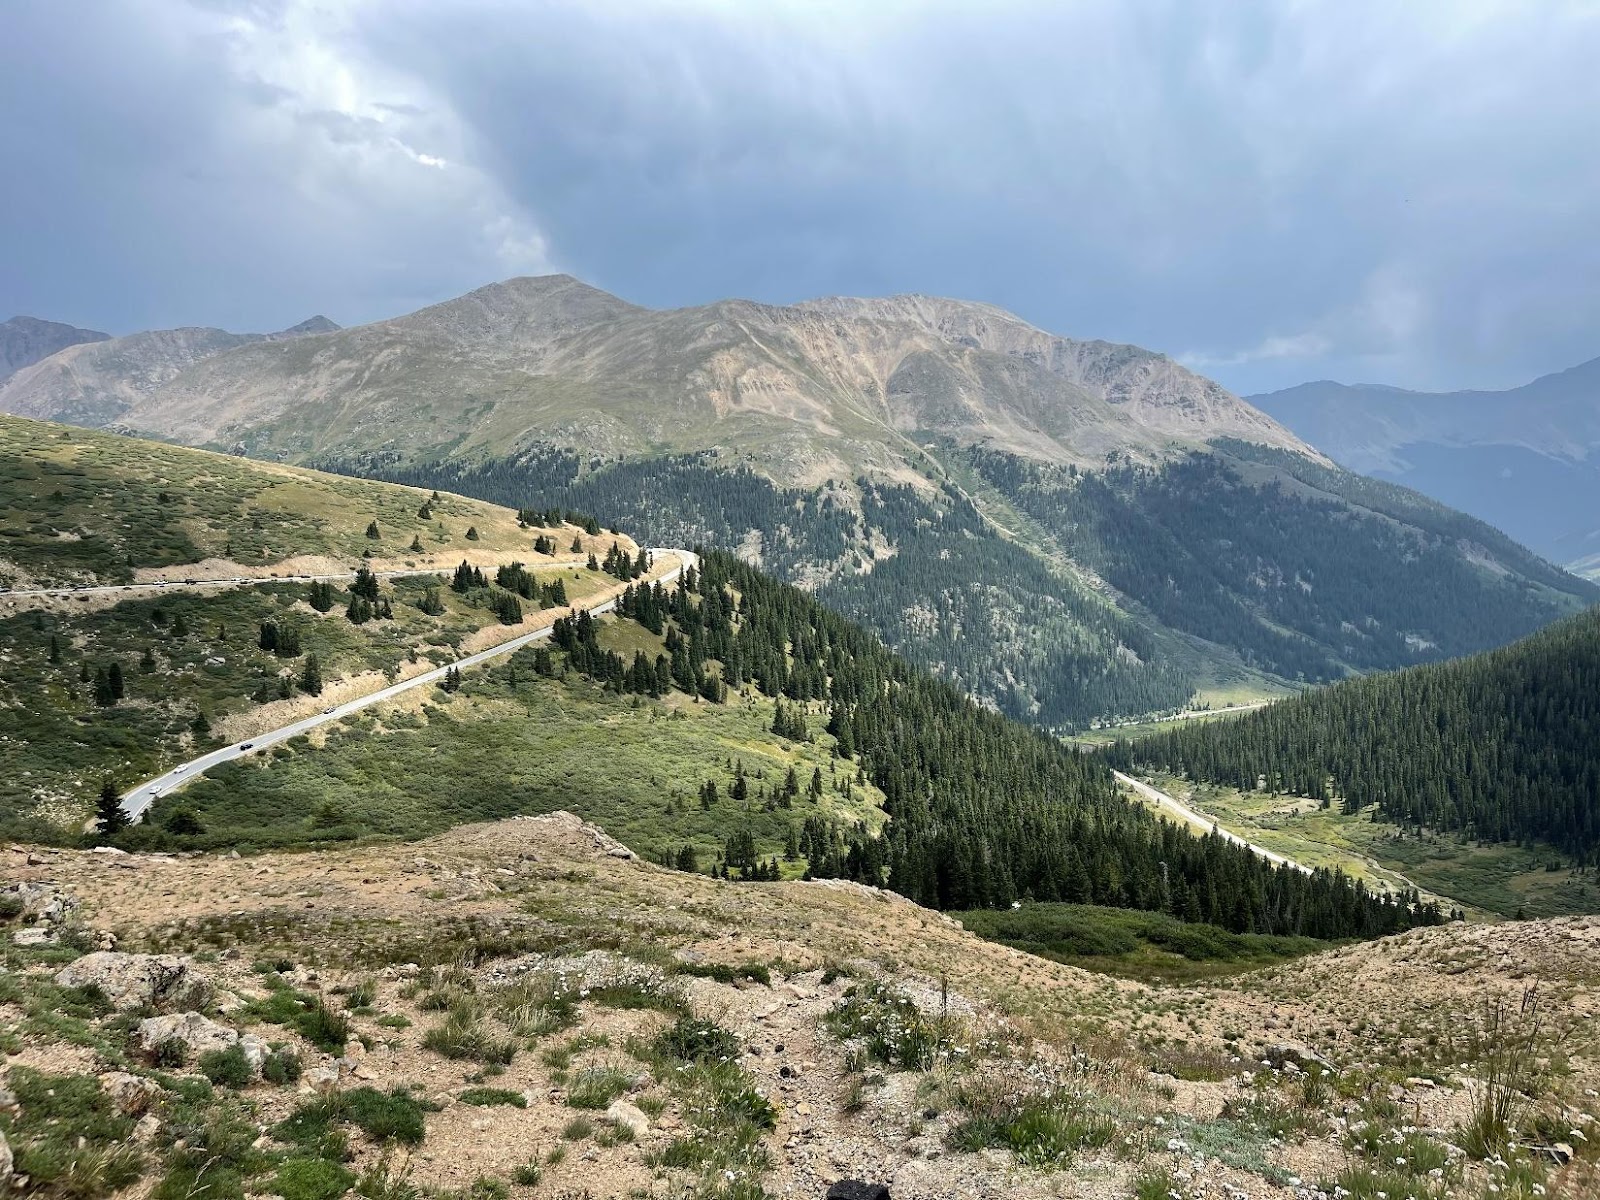 C:\Users\tsteinberg\Pictures\Misc 2021\Independence Pass.jpg